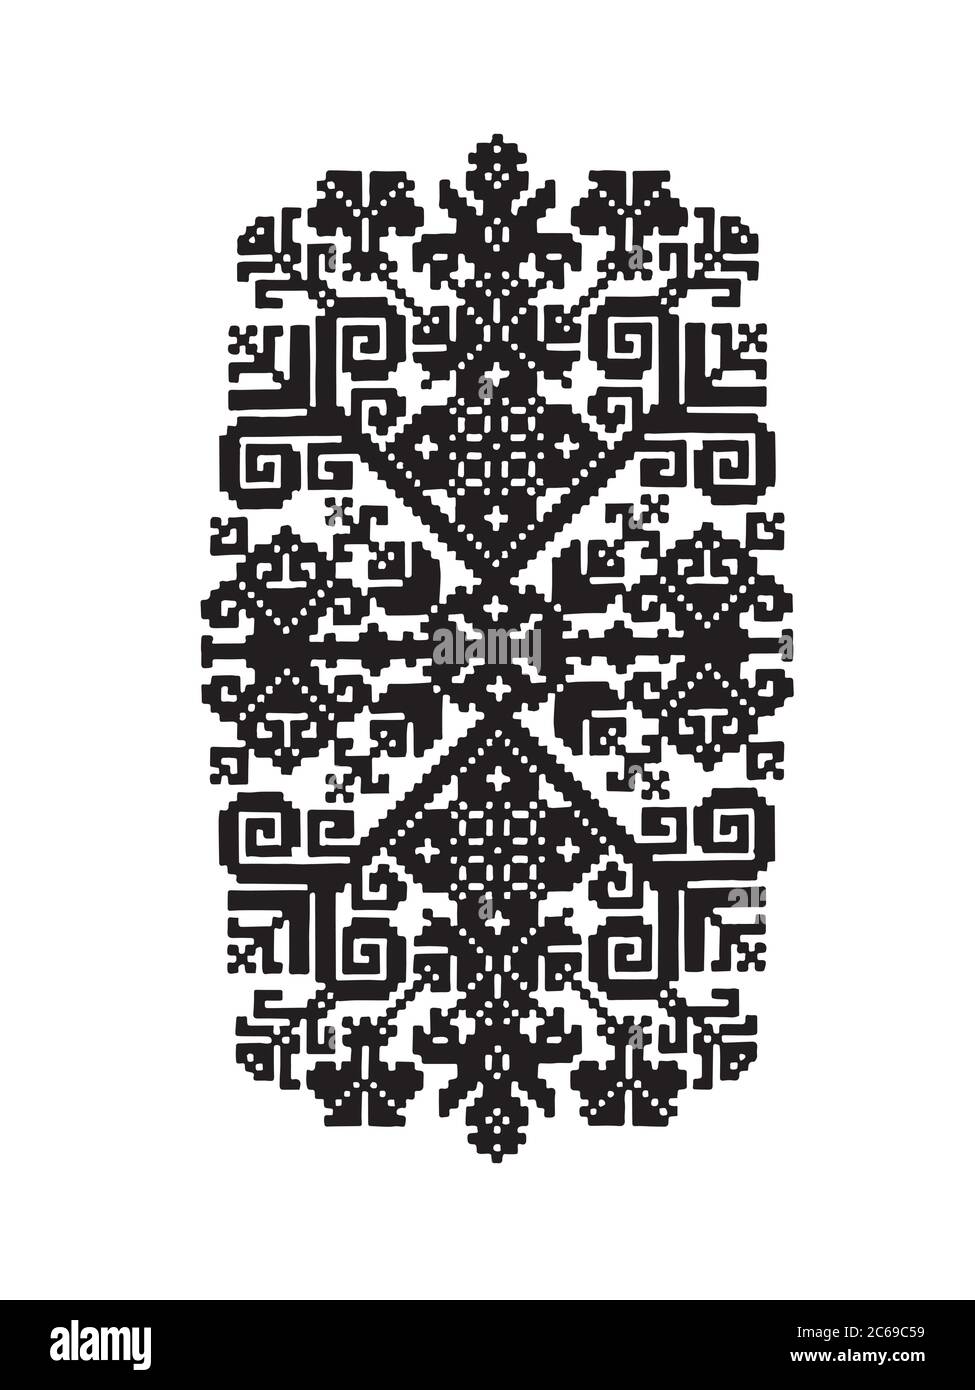 Traditional Latvian Sign Ornament. Black on White Vector Design. Baltic Countries Tradition Stock Vector